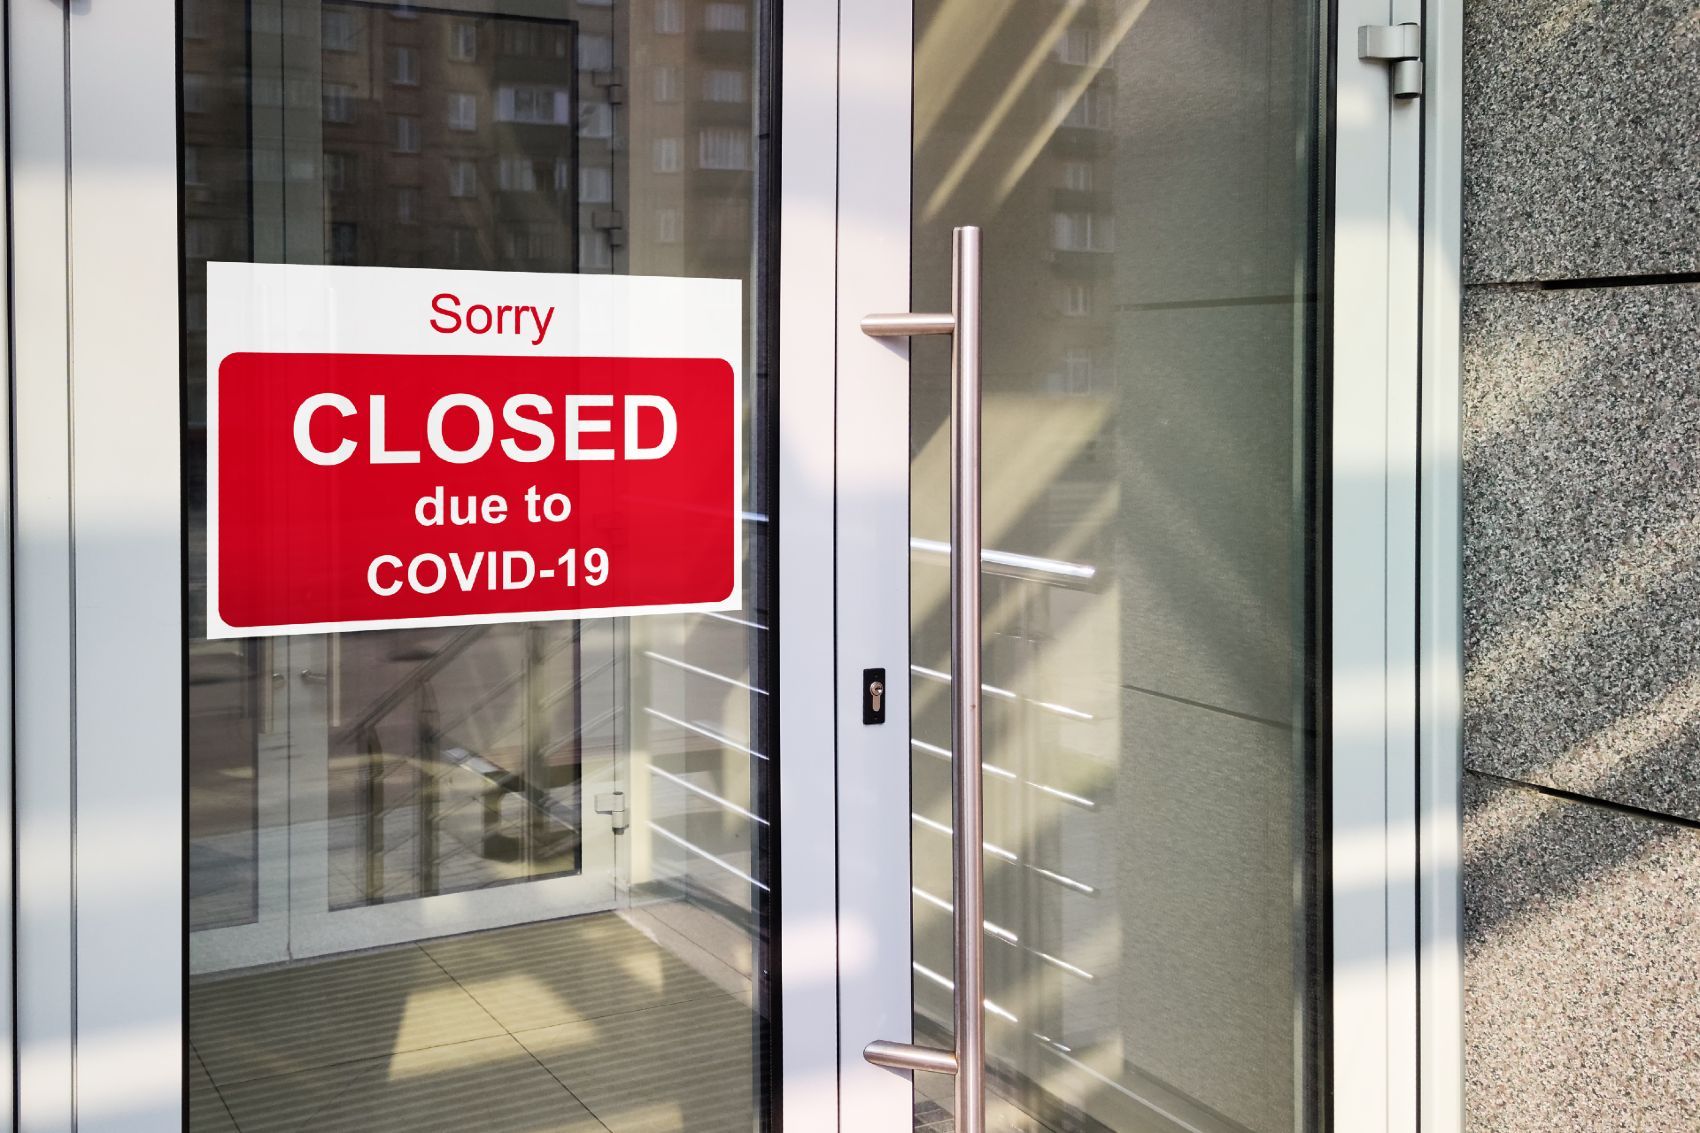 A red-and-white sign on the glass door of a business reads "Sorry CLOSED due to COVID-19" - coronavirus restrictions